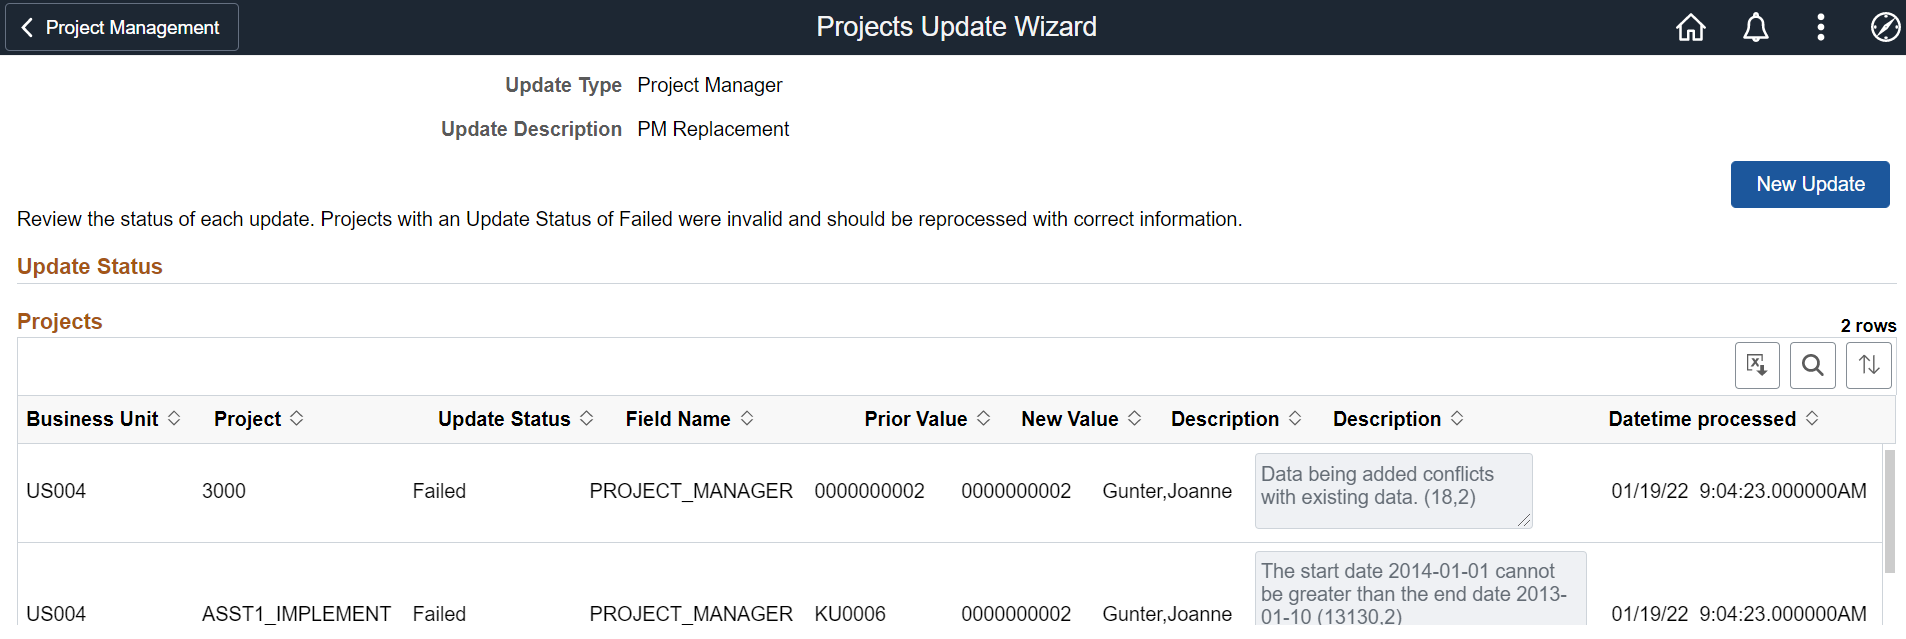 Project Update Wizard - Save Confirmation page